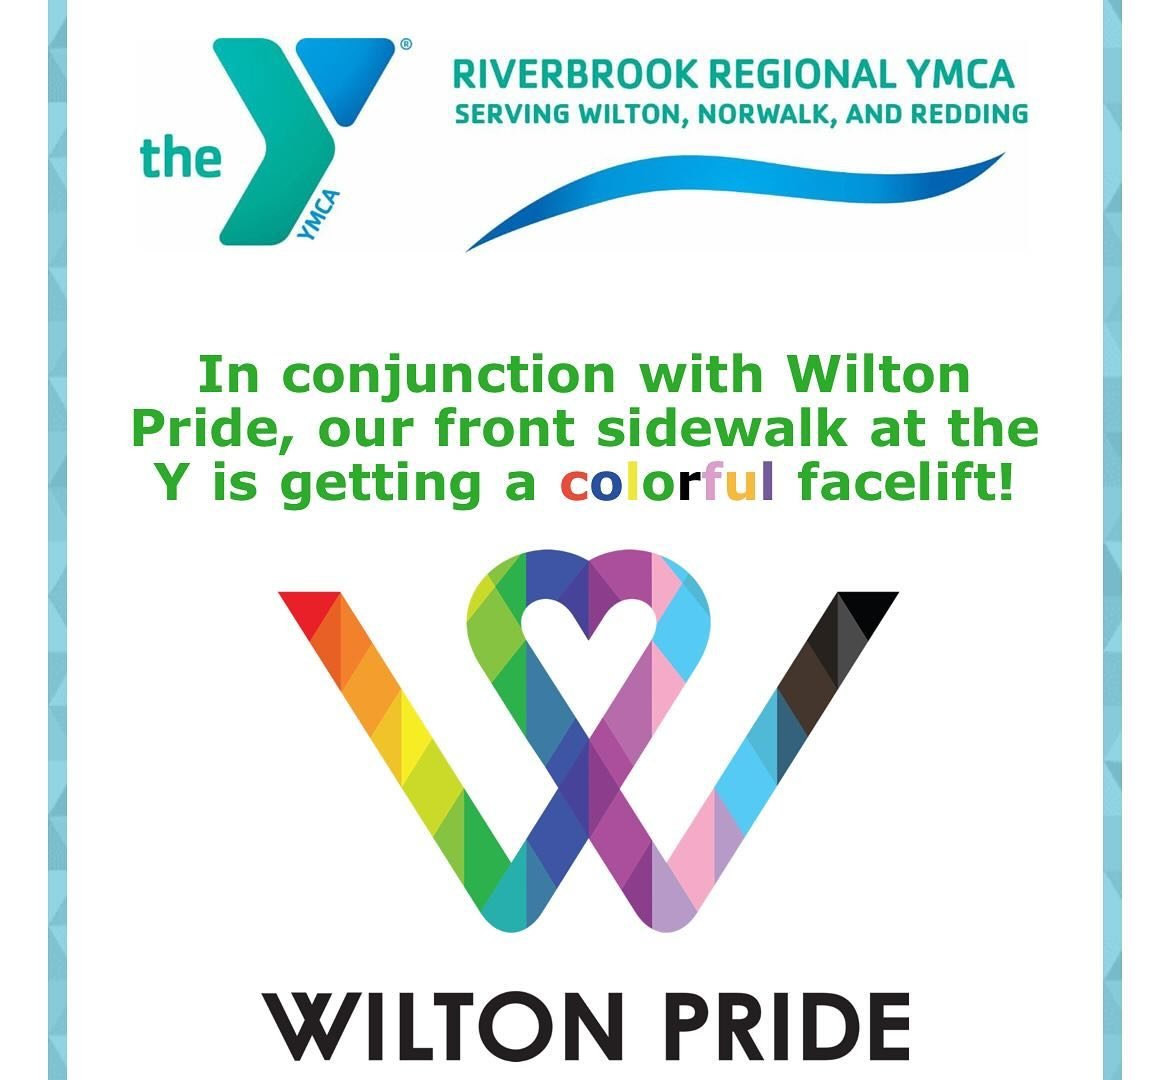 Getting excited 🏳️&zwj;🌈🏳️&zwj;⚧️🏳️&zwj;🌈 So lucky to have  the support of the Y! 🌈

#showyourwiltonpride